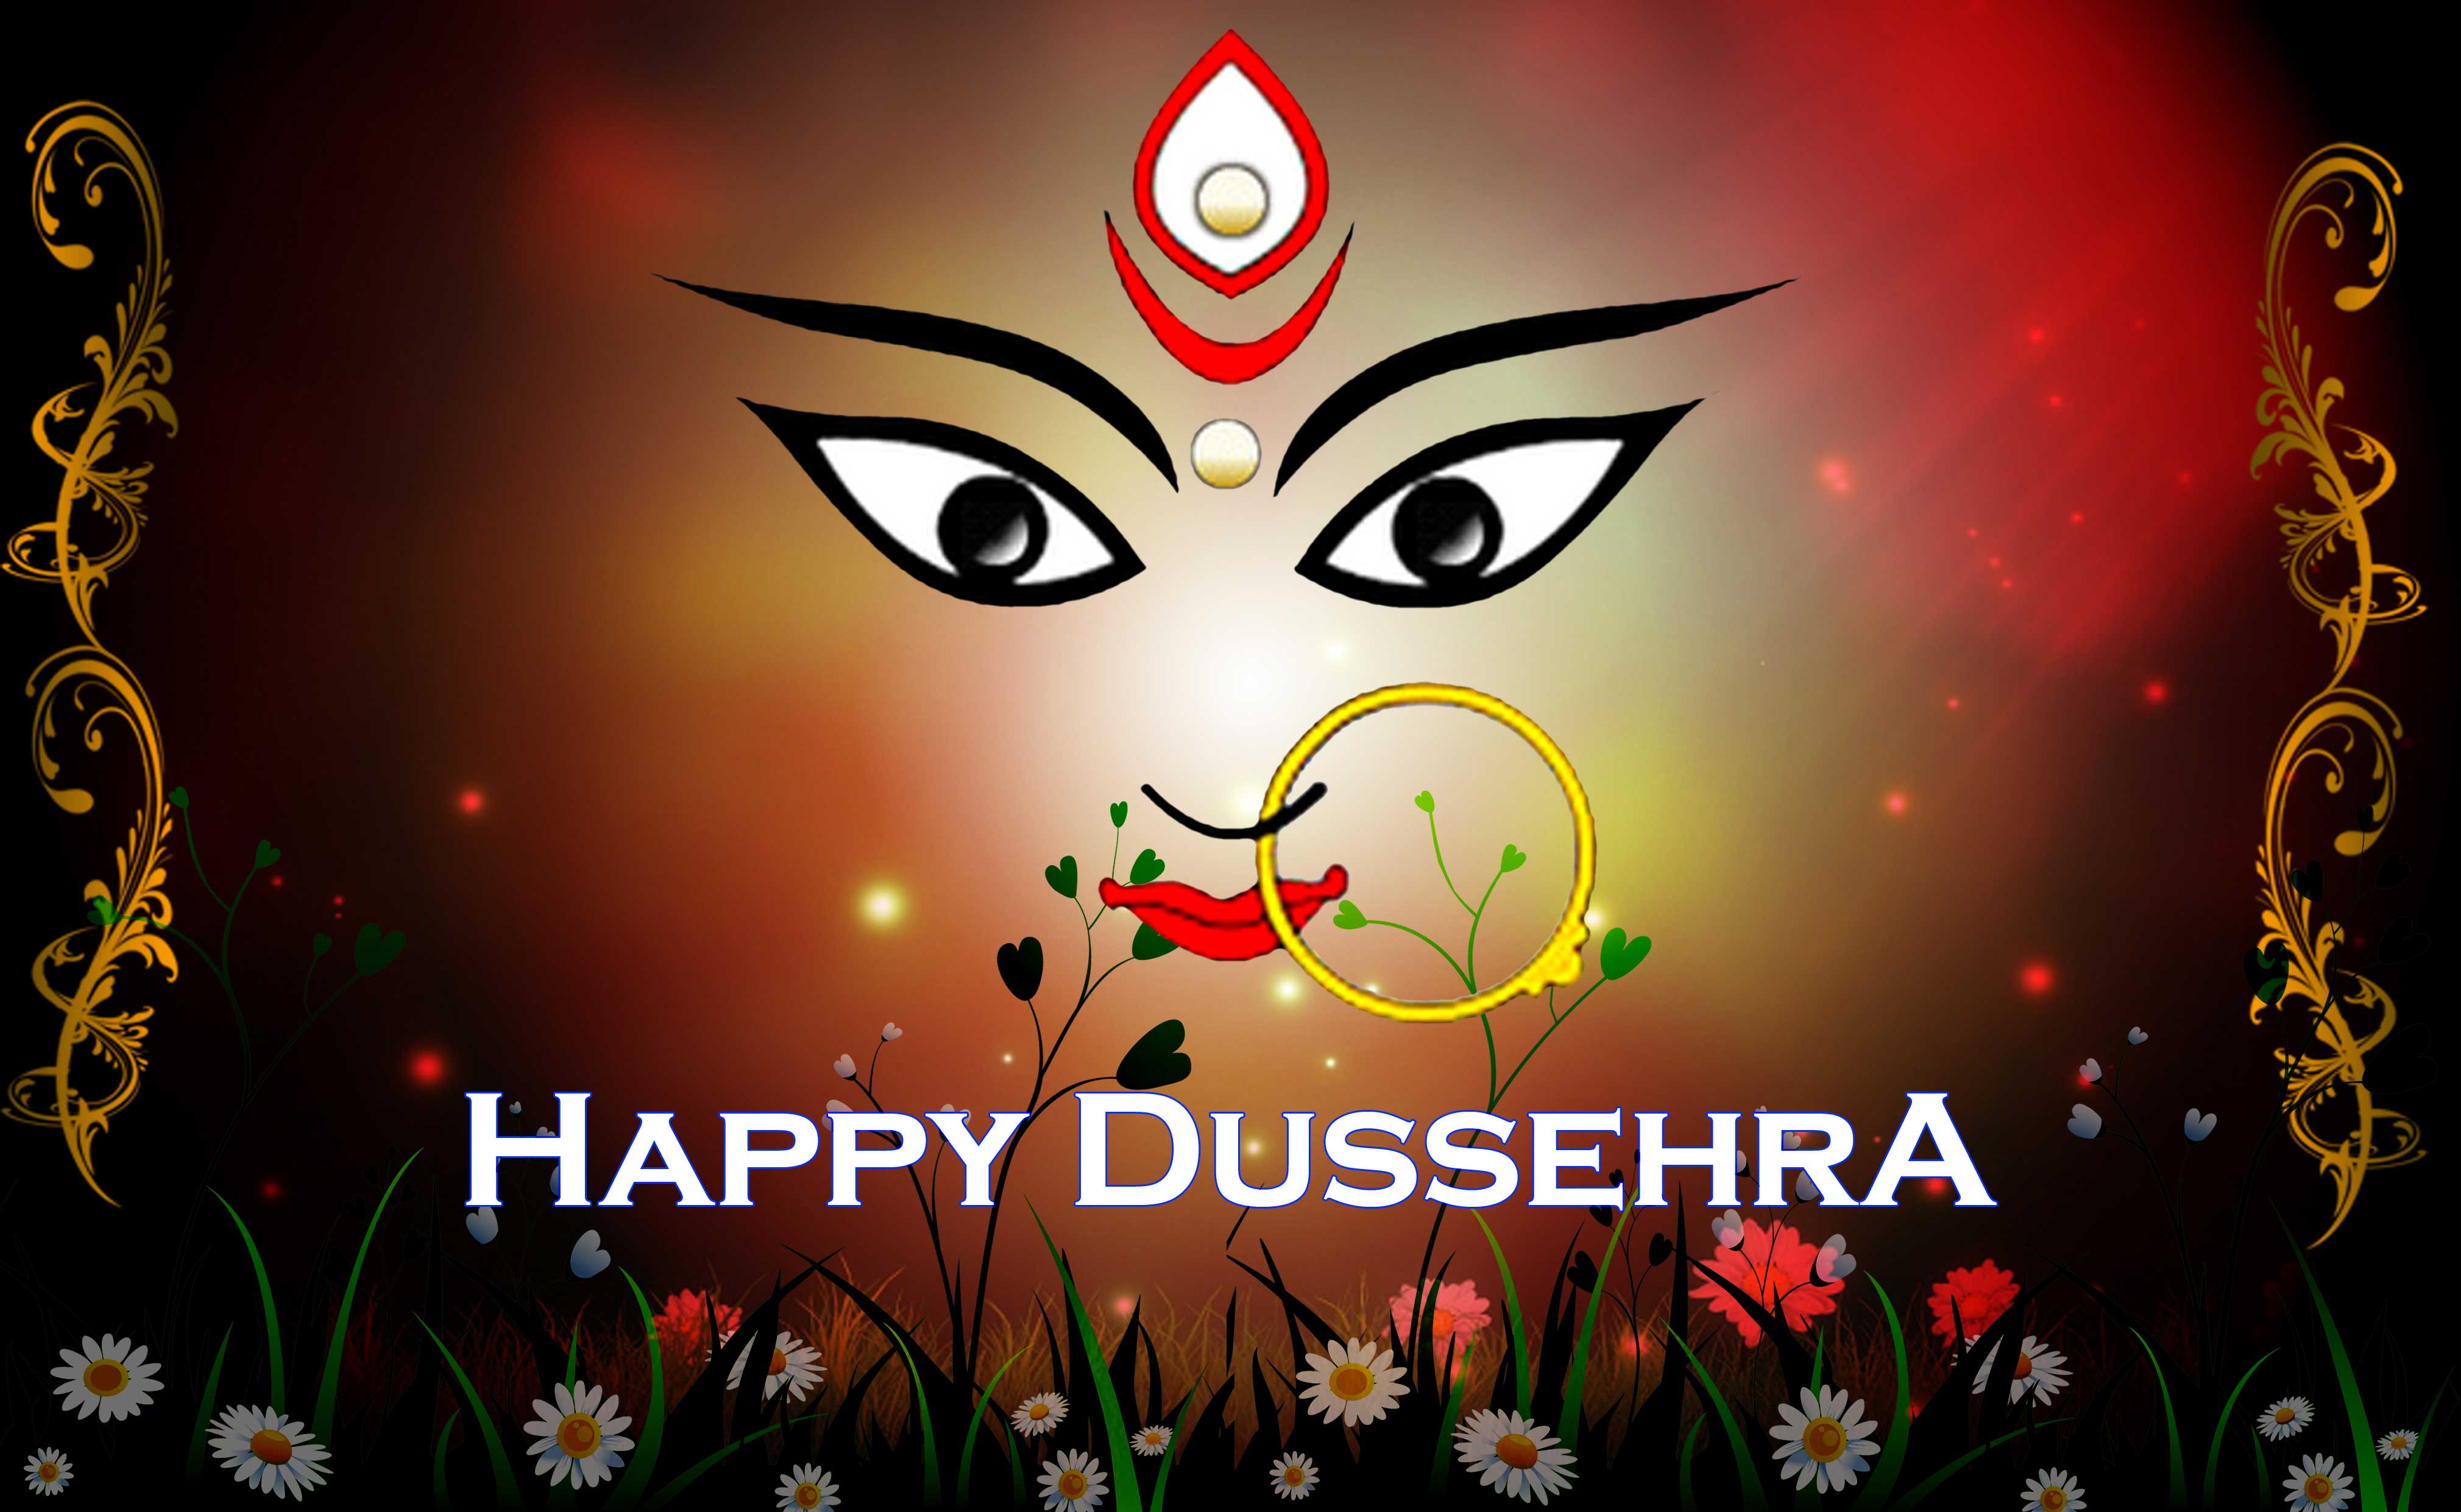 Best Collection for Dussehra HD Images, Wallpapers, Photos and more – The  Popular Festivals